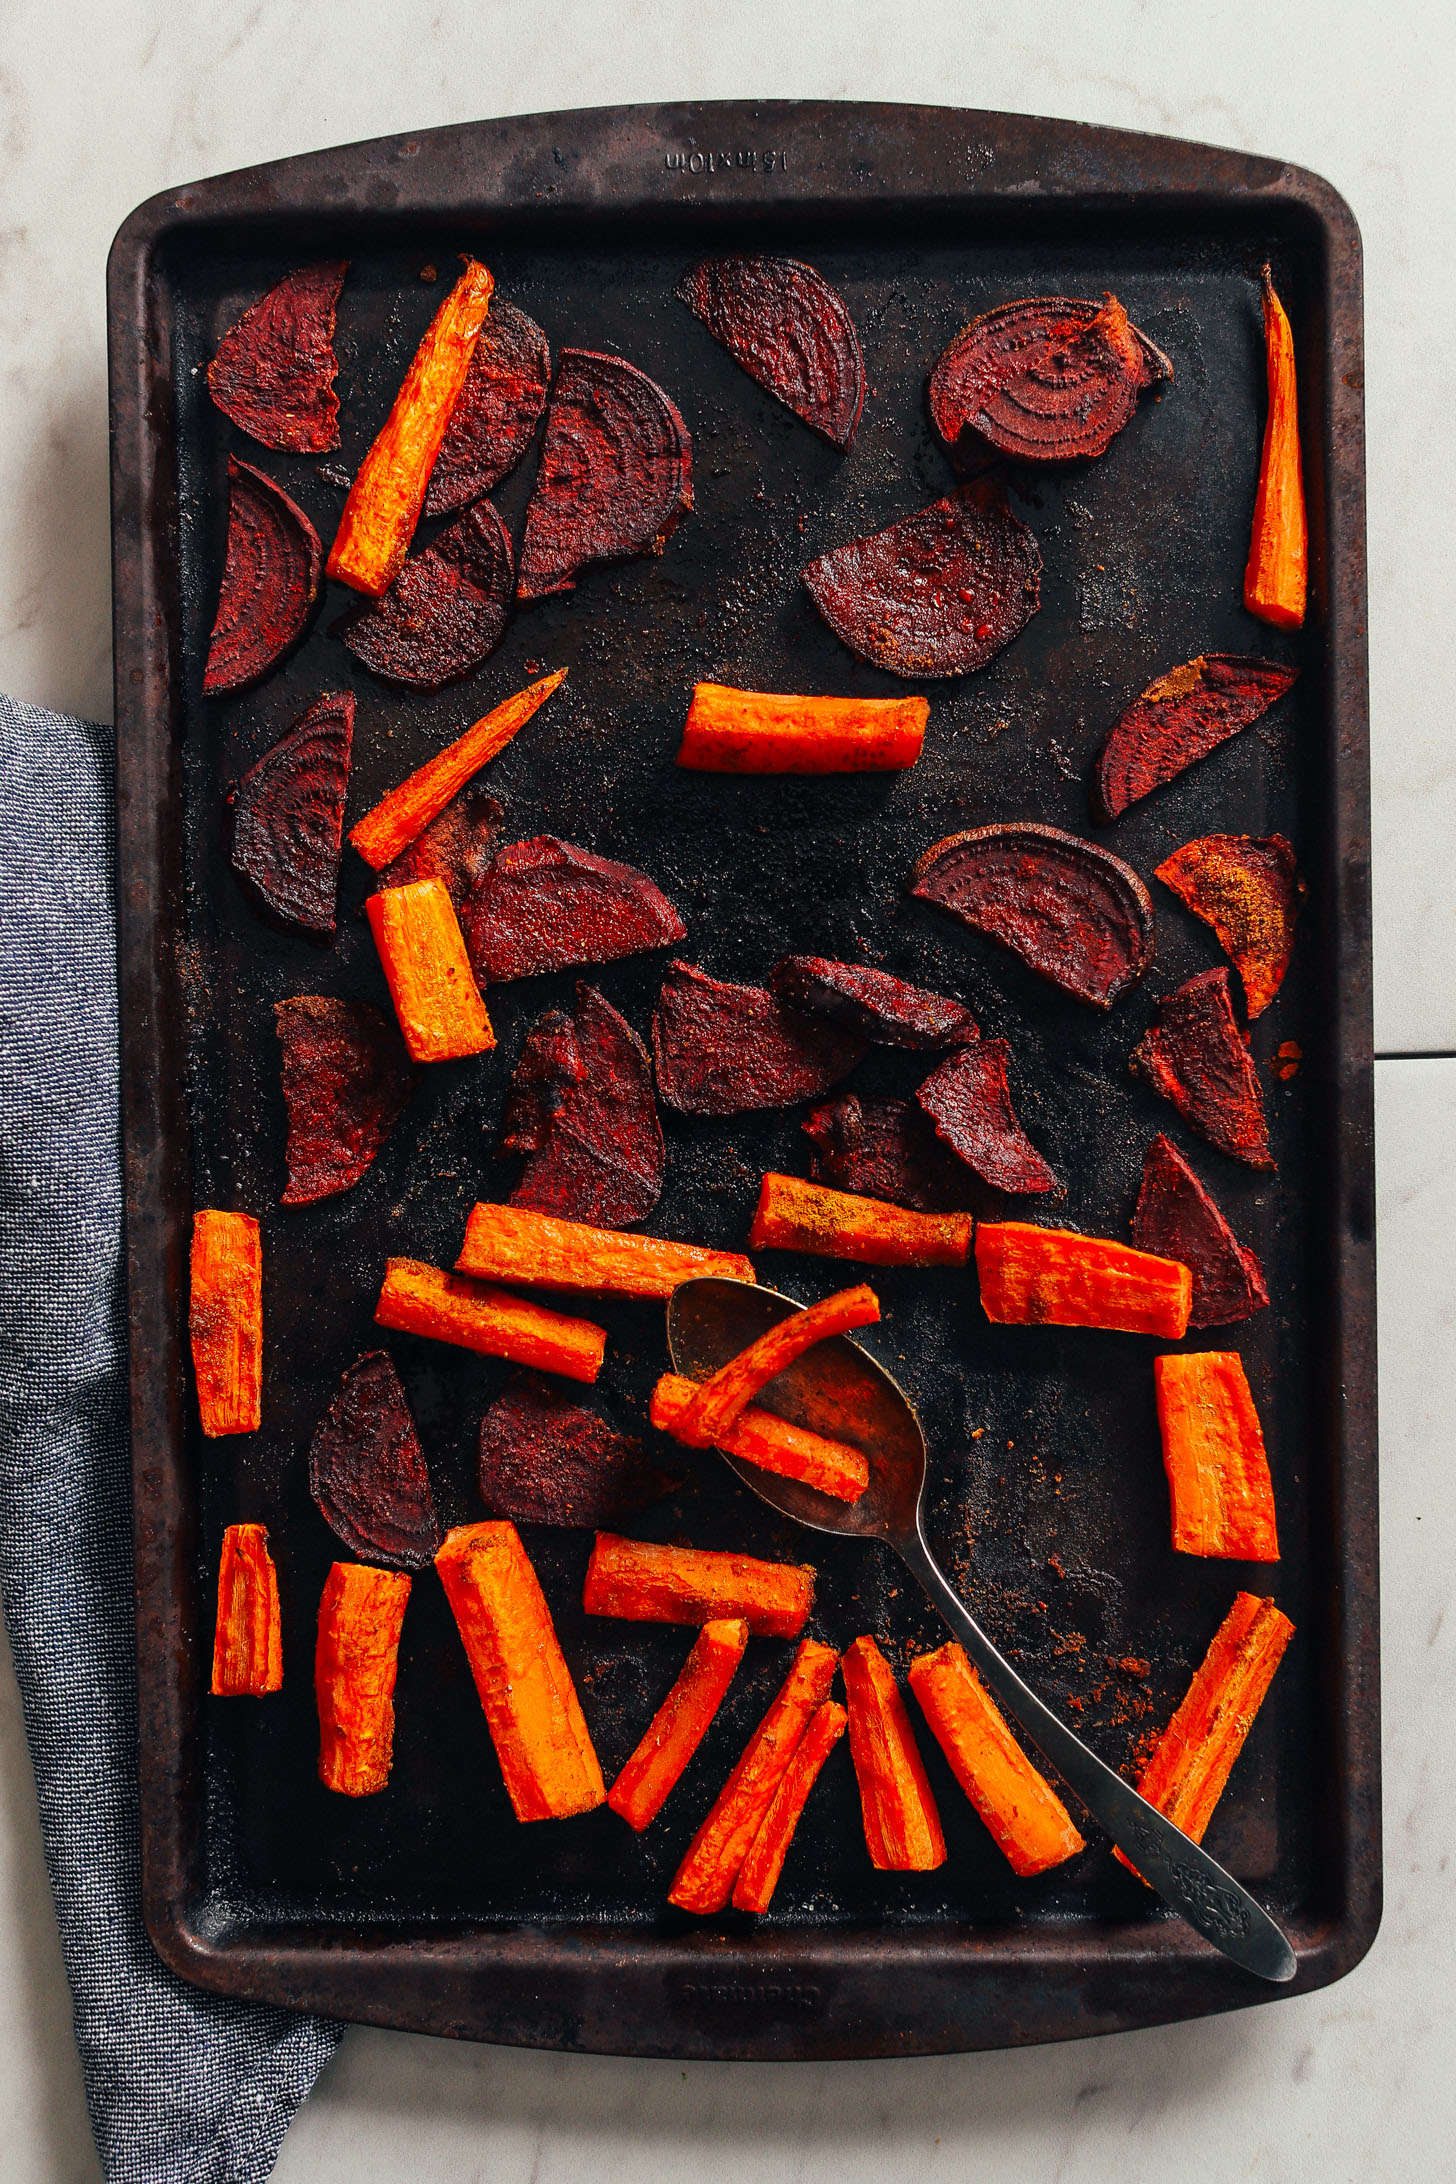 Roasted beets and carrots on a baking sheet for Loaded Kale Salad